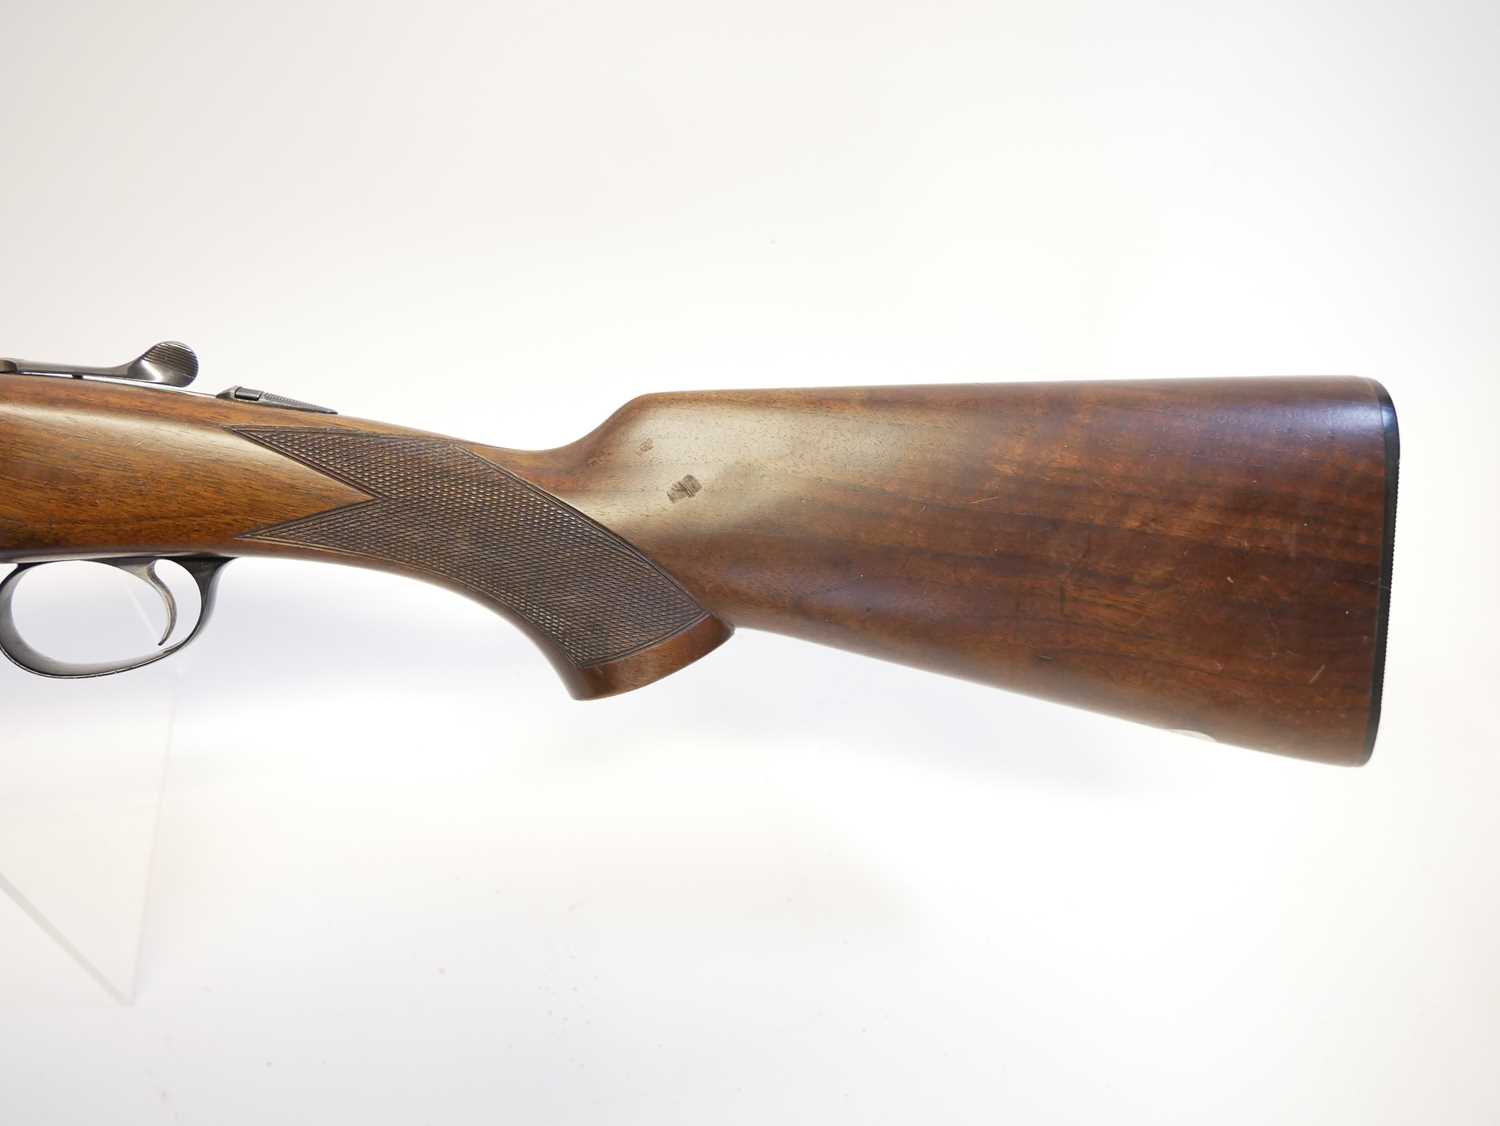 Beretta 12 bore side by side Model 626E shotgun, serial number A40366A, 28inch barrels with half and - Image 15 of 15